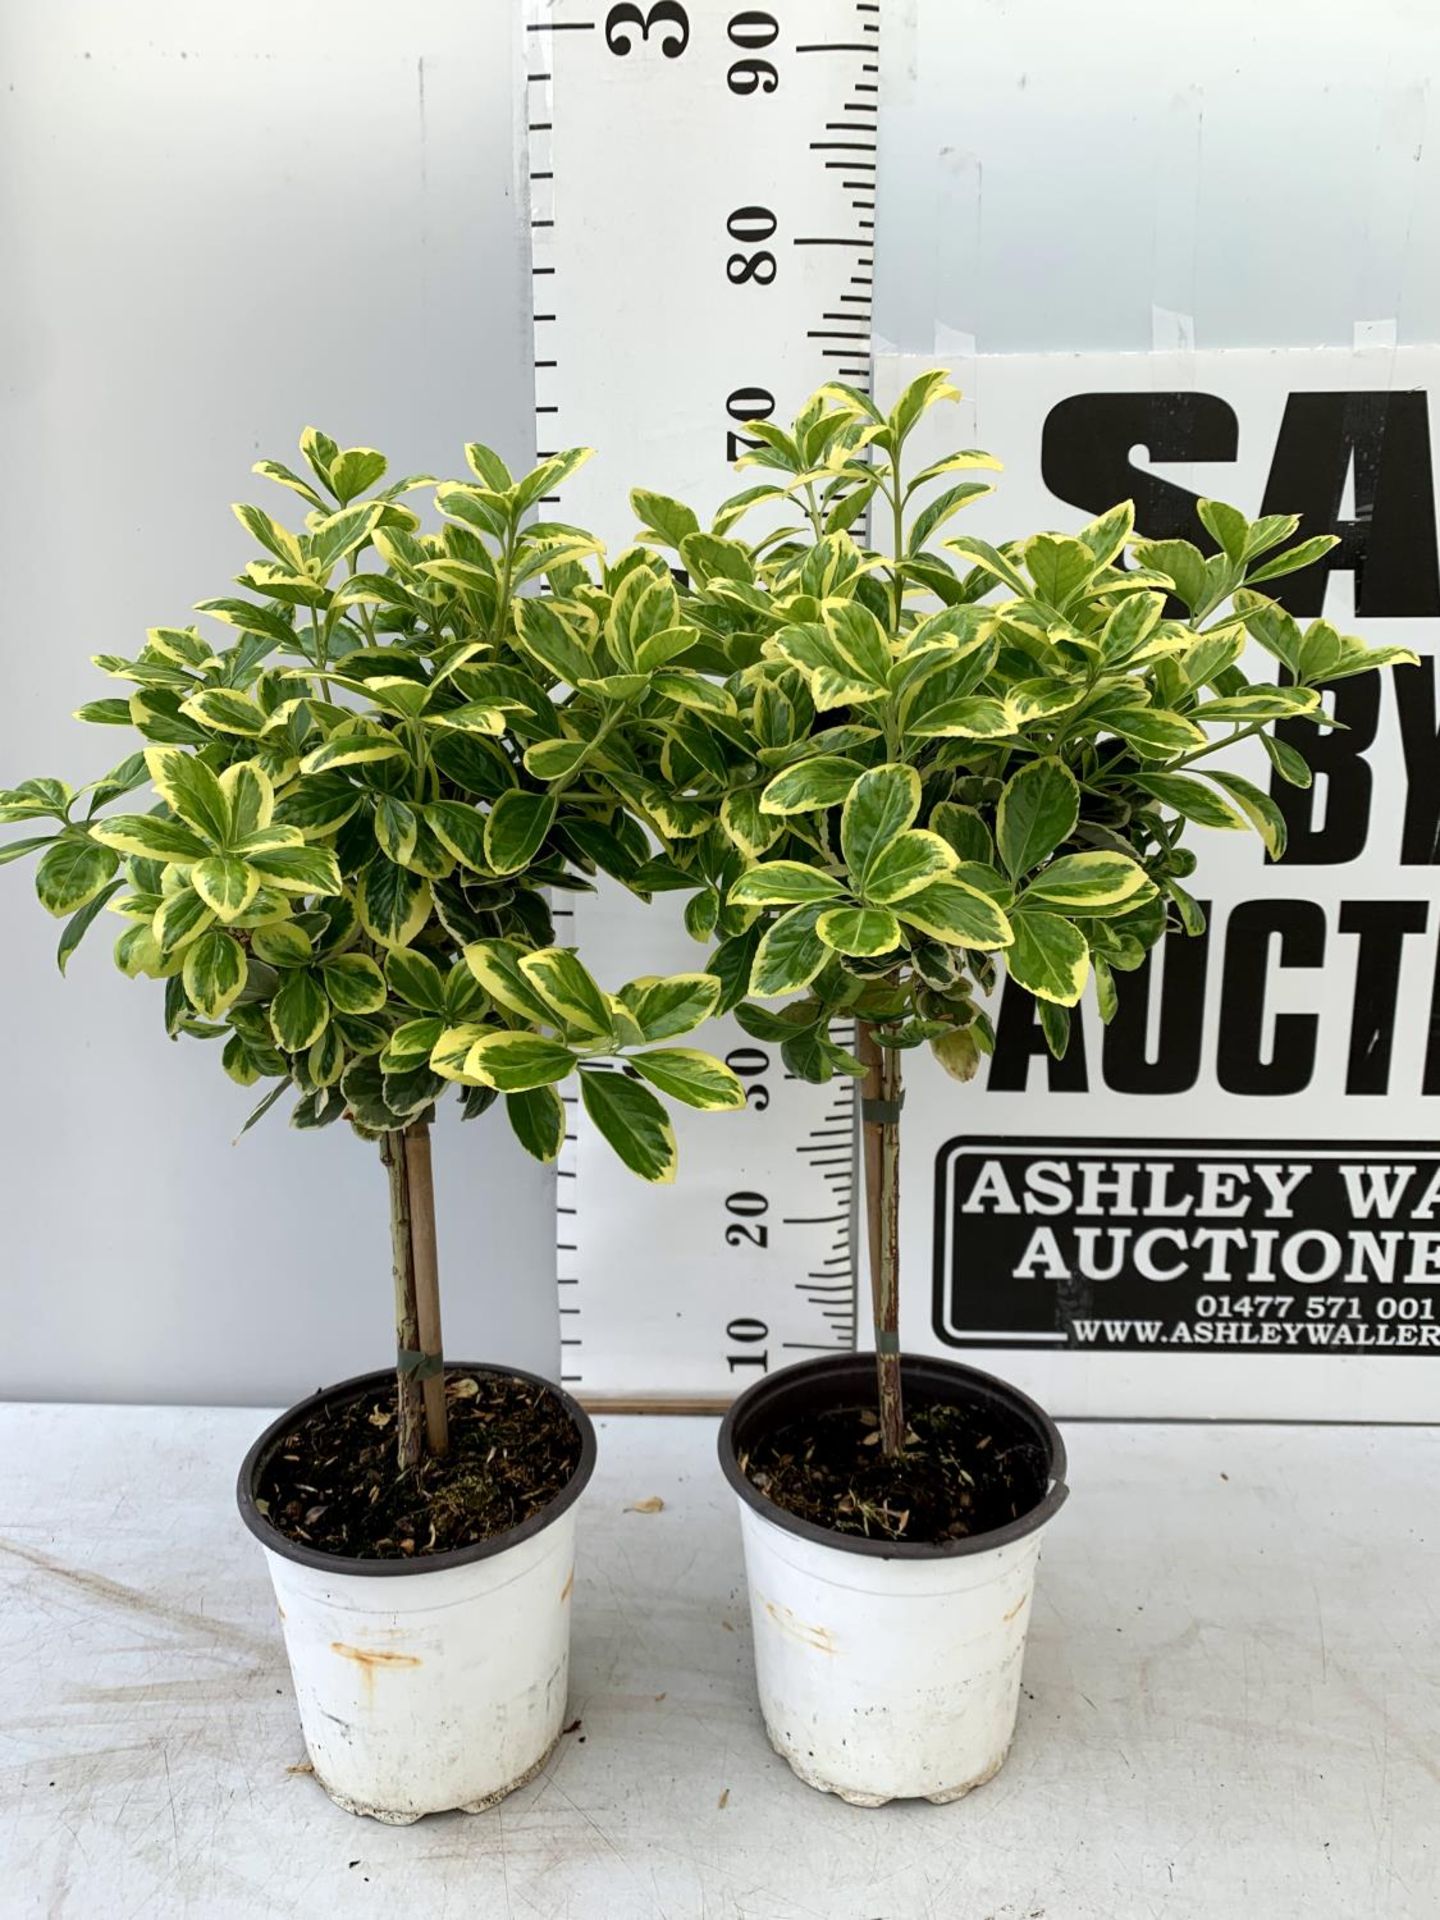 TWO EUONYMUS JAPONICUS STANDARD TREES APPROX 70CM IN HEIGHT IN 2 LTR POTS PLUS VAT TO BE SOLD FOR